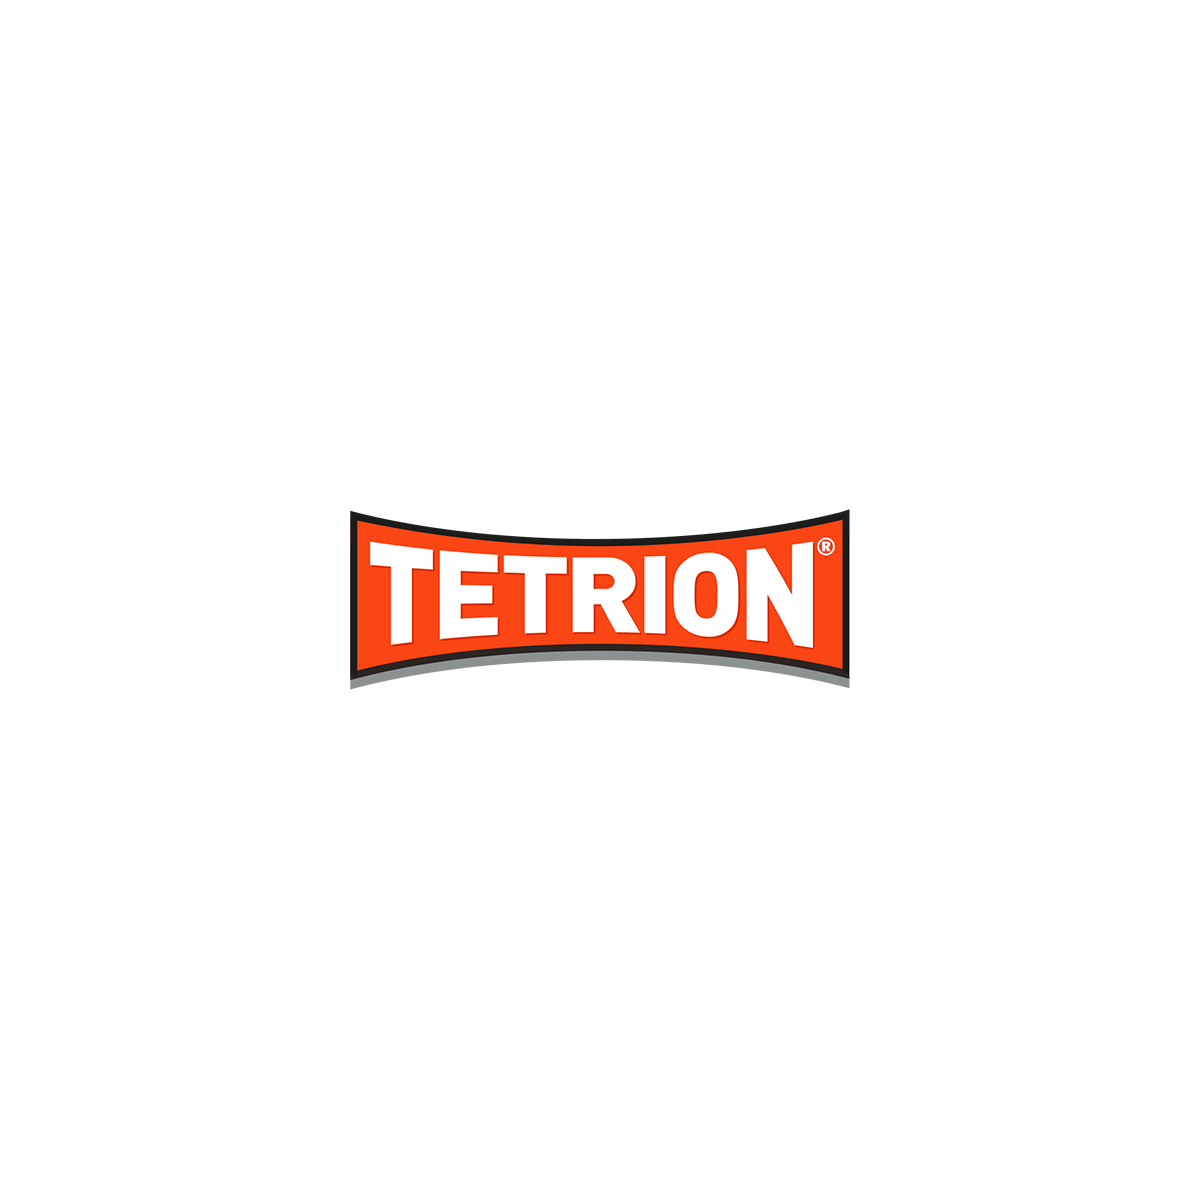 Where to Buy Tetrion Products